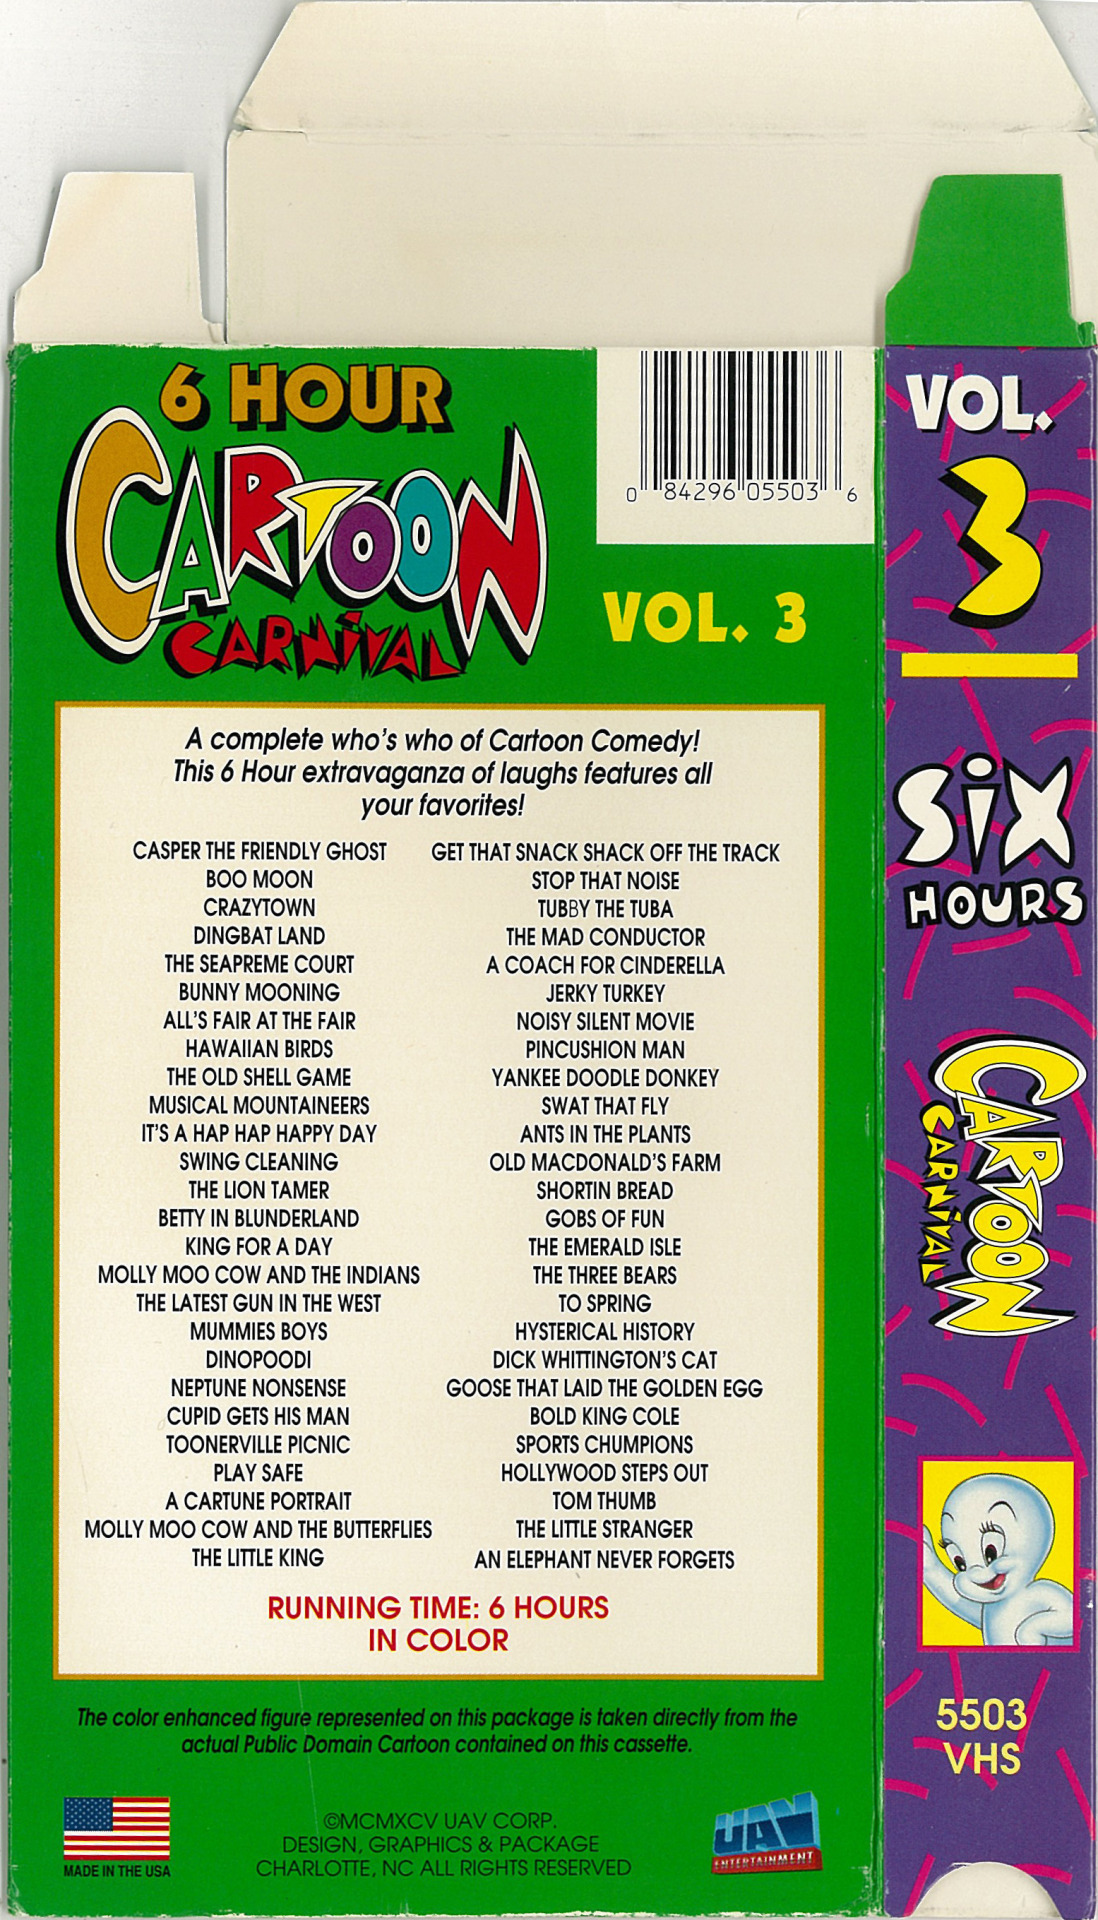 The VCR from Heck, “FIFTY CARTOONS” WEEK!!! ADDENDUM #1- 6-Hour...